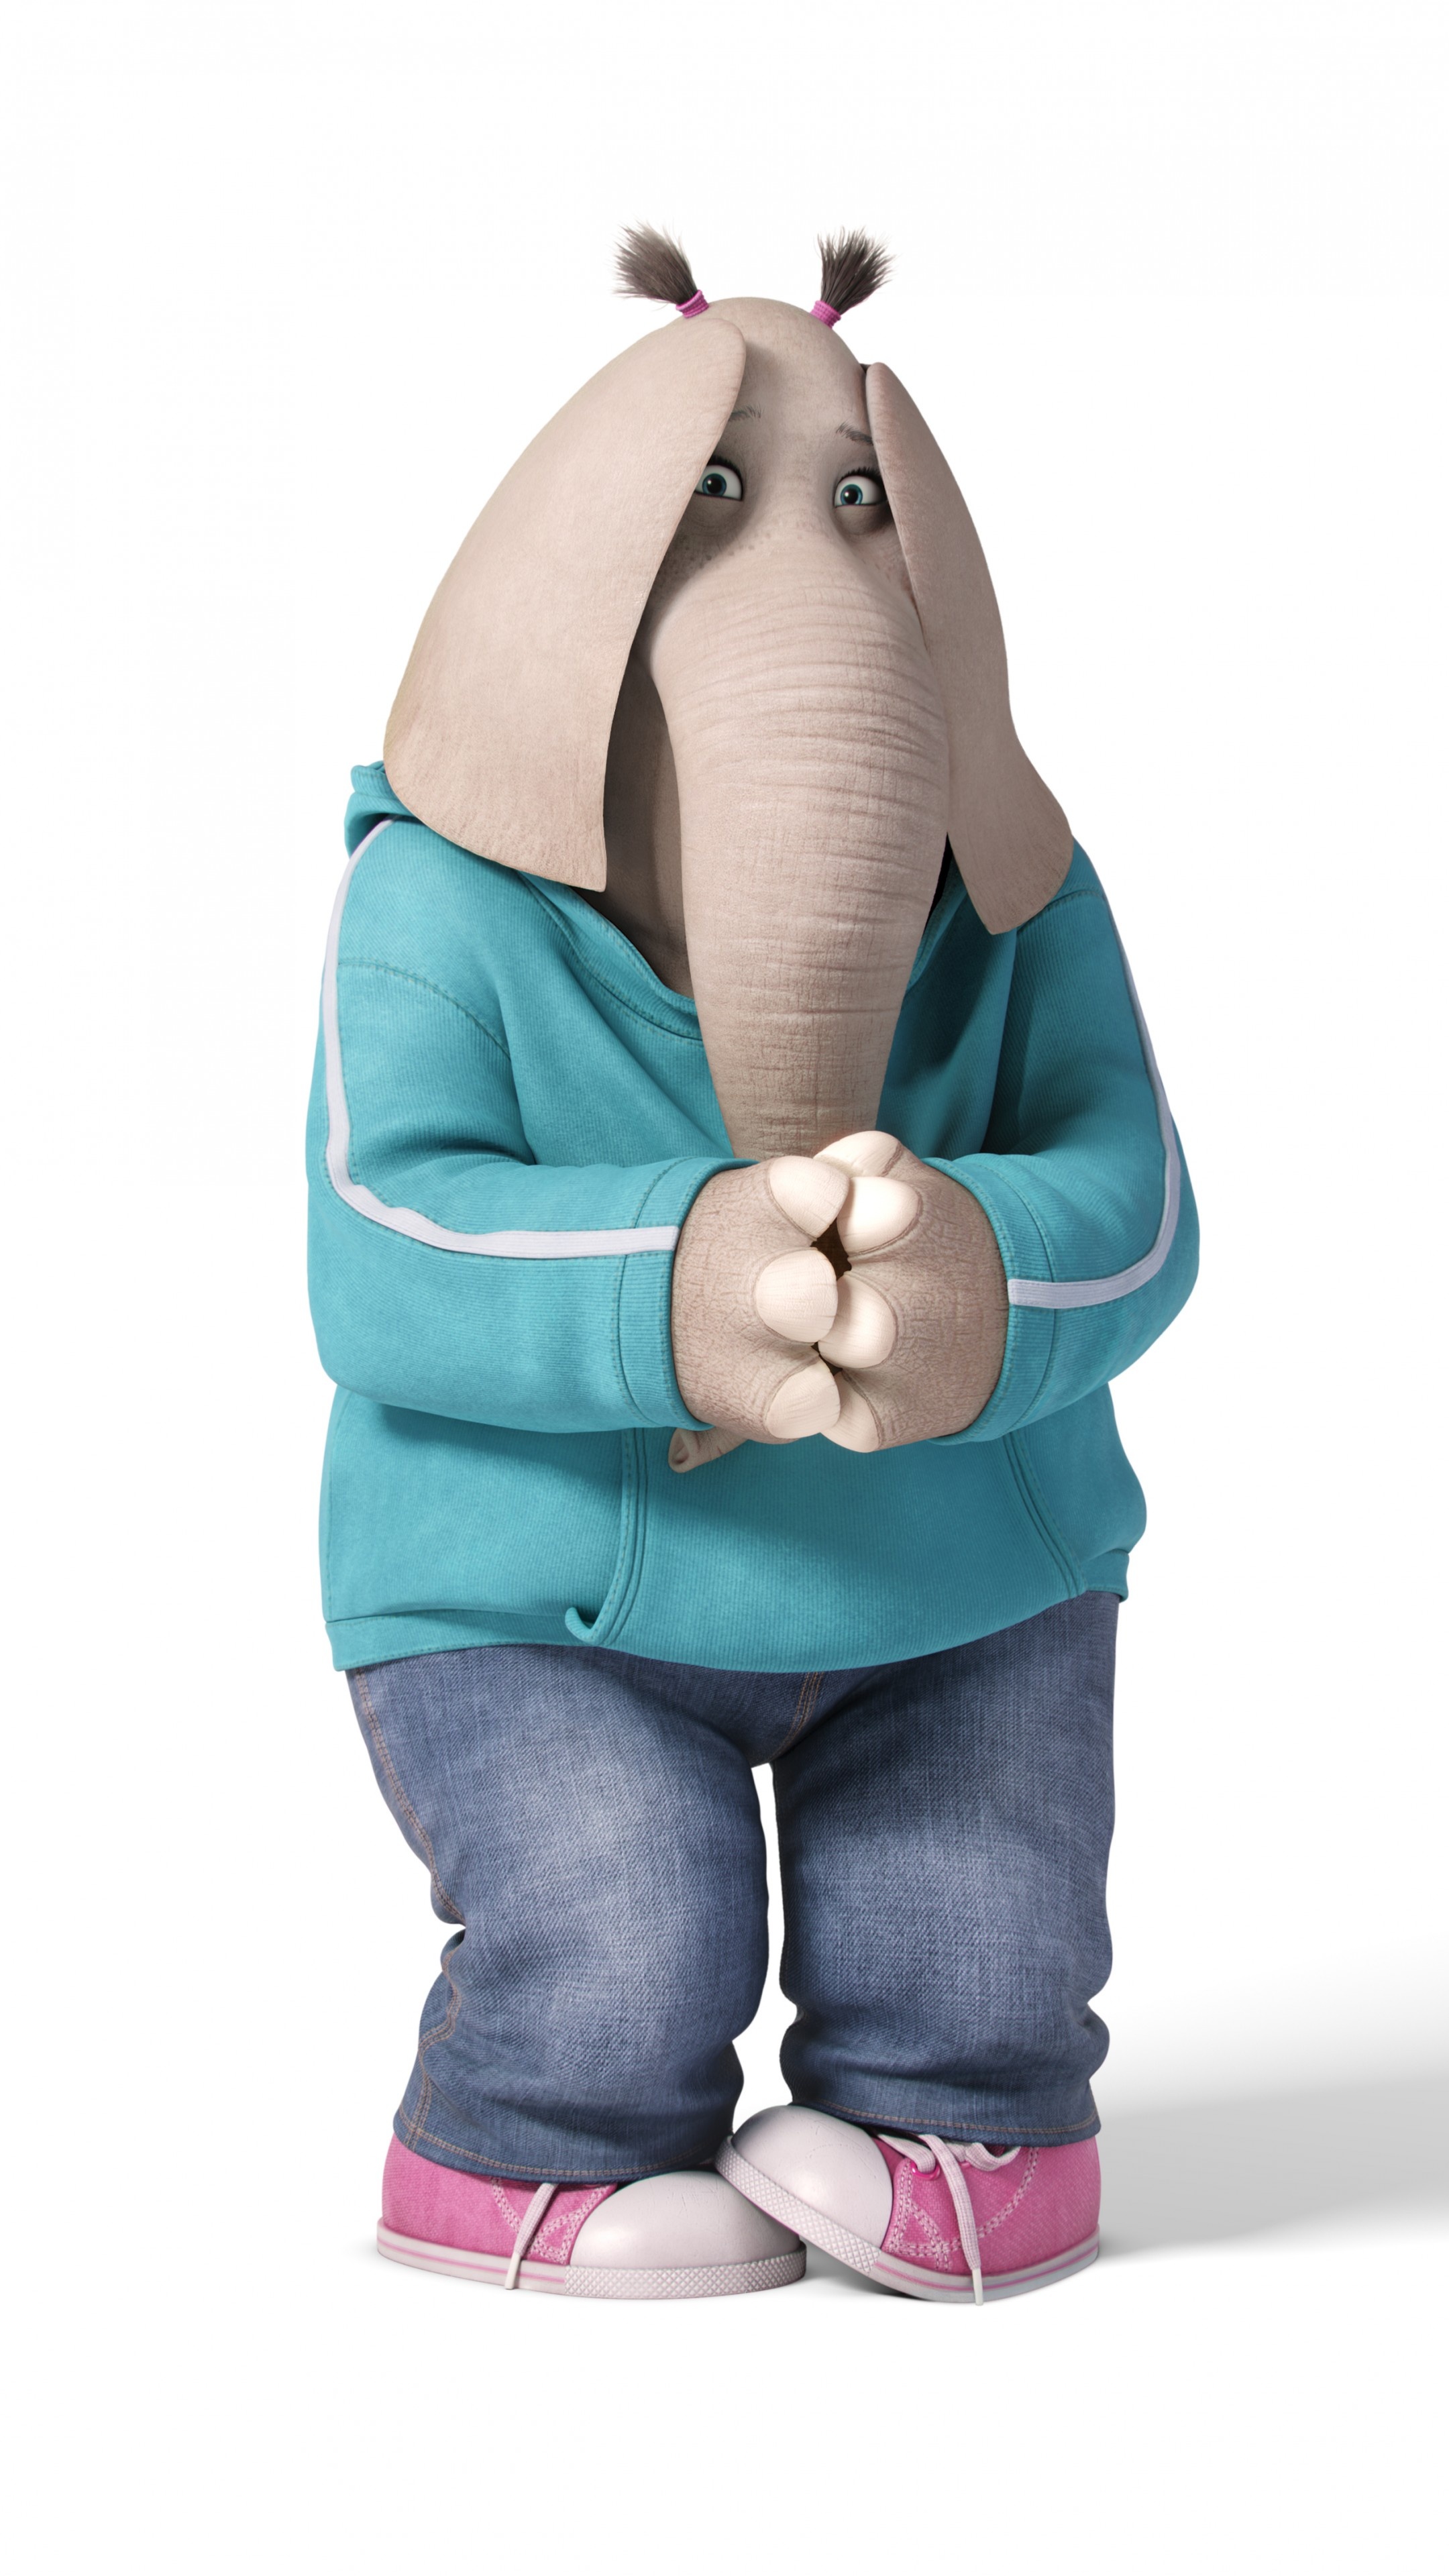 Sing animated movie, Talented elephant, Memorable animation, 2016's best films, 2160x3840 4K Phone